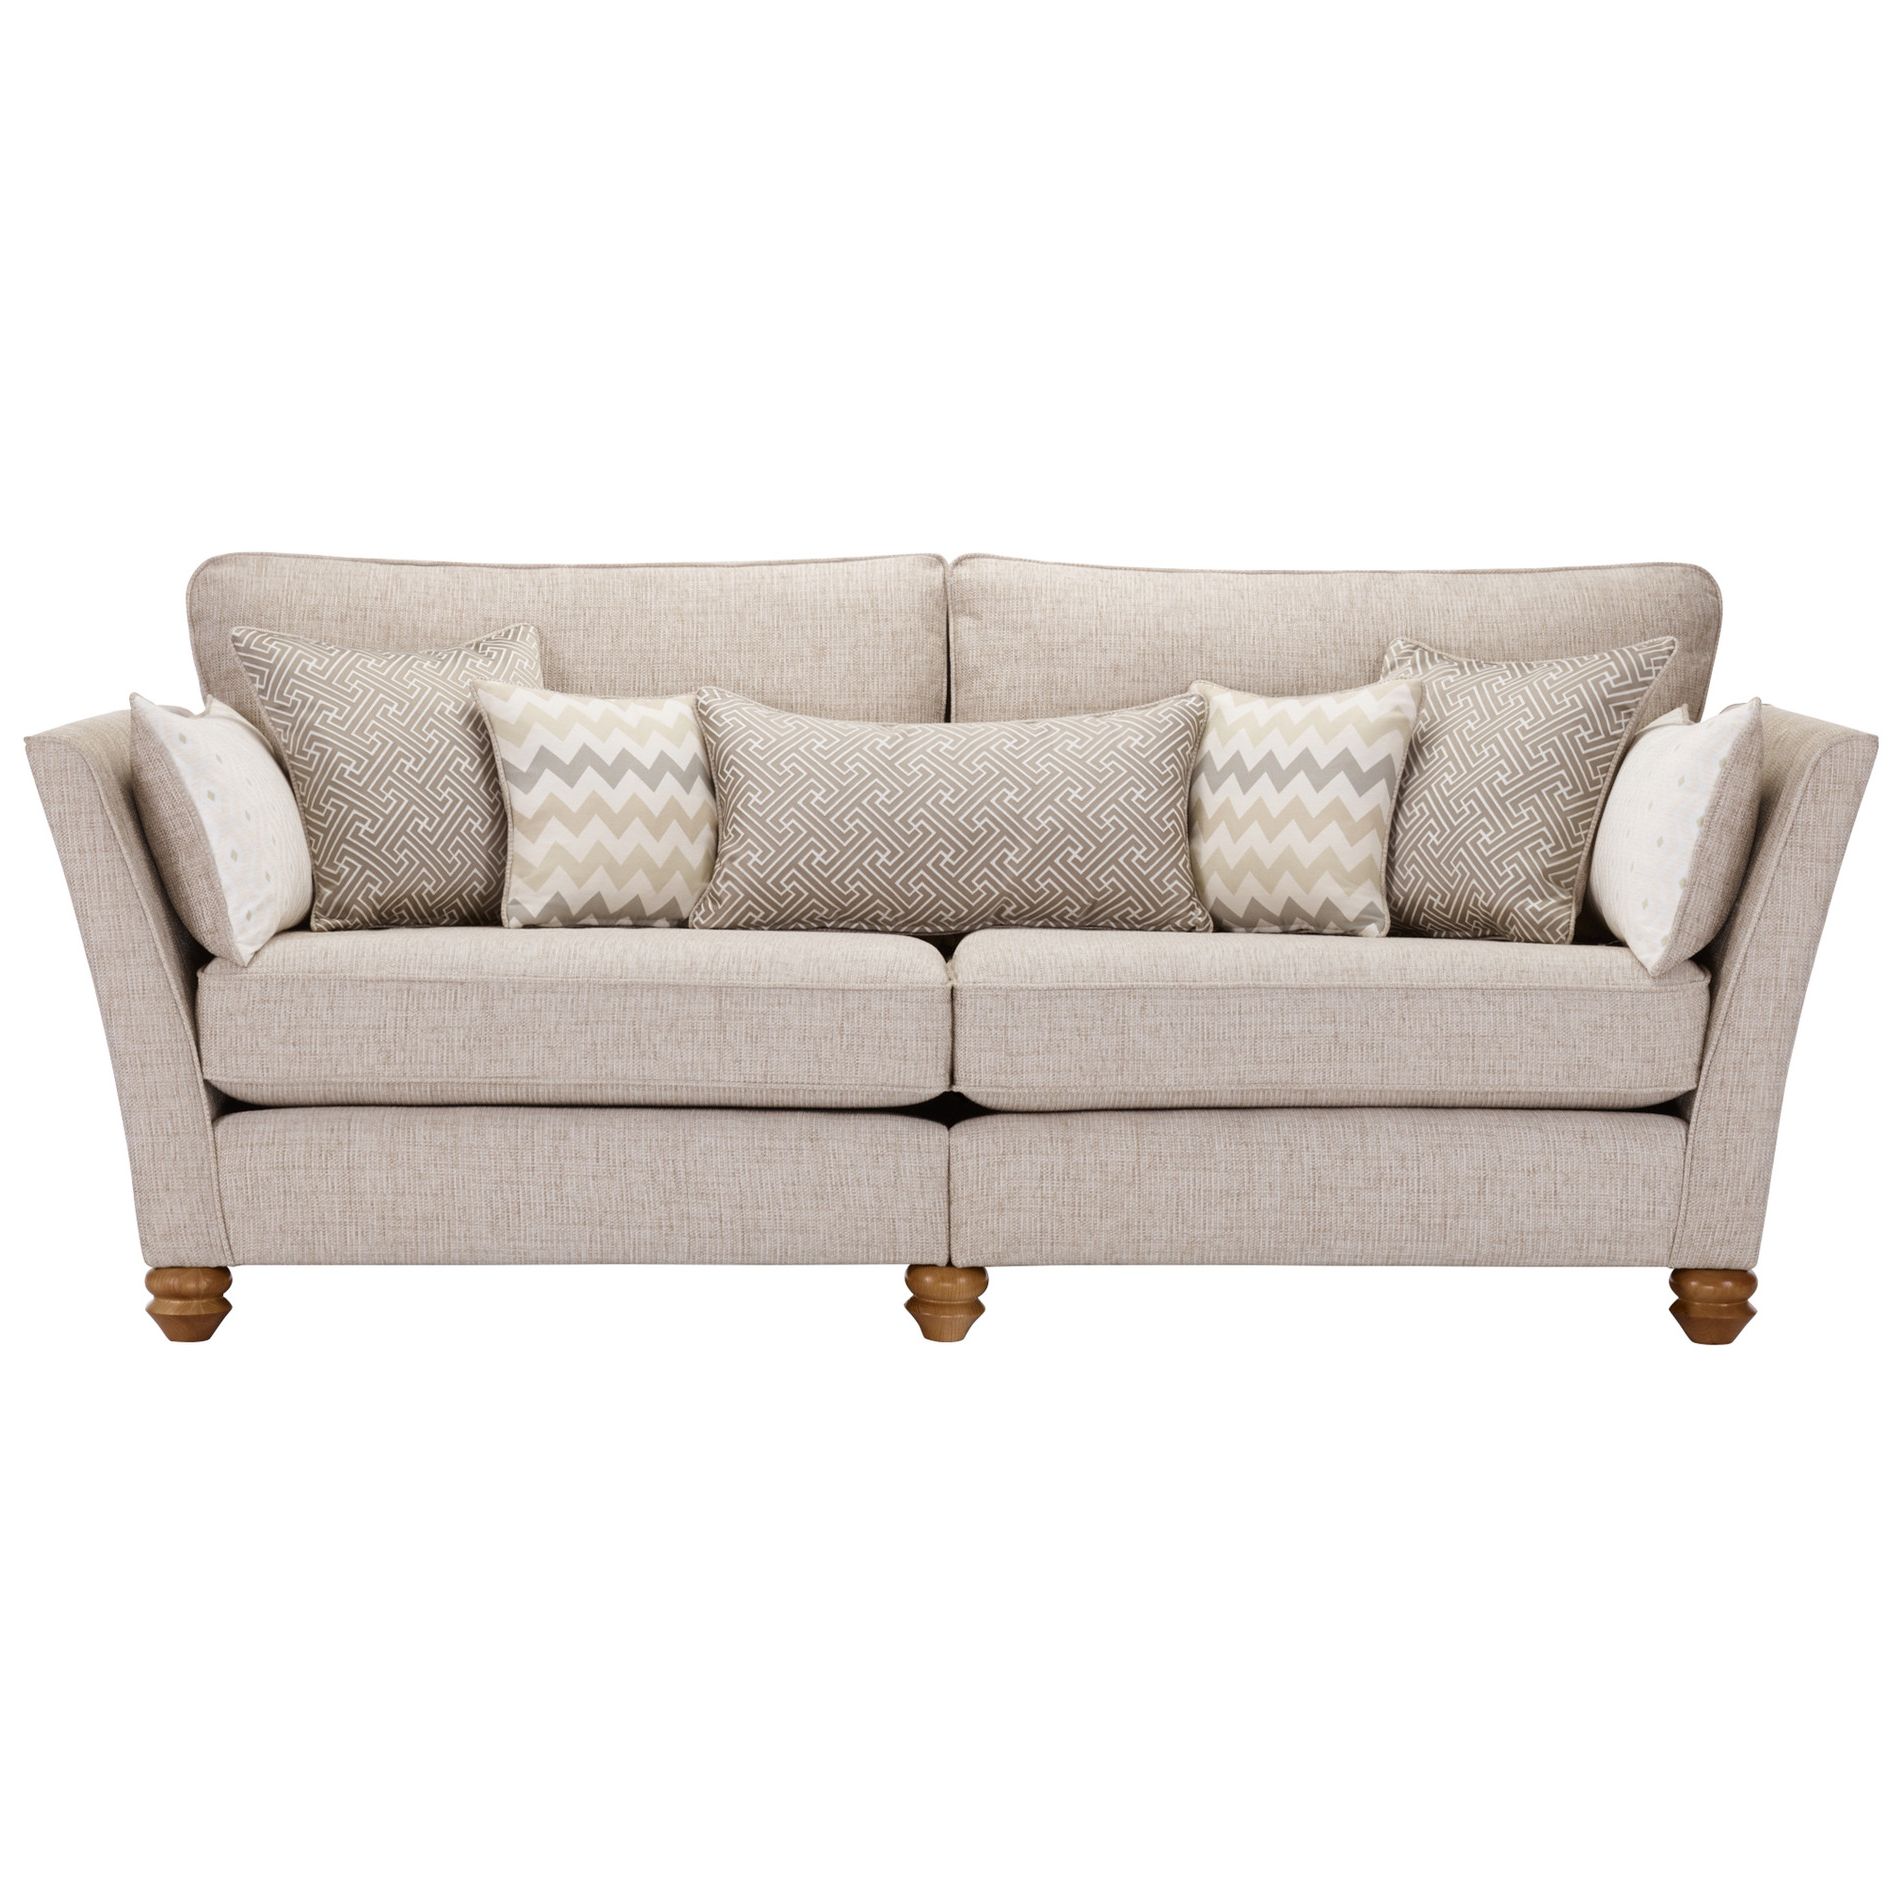 Widely Used Gainsborough 4 Seater Sofa In Beige + Matching Scatters Pertaining To Sofas In Beige (Photo 11 of 15)